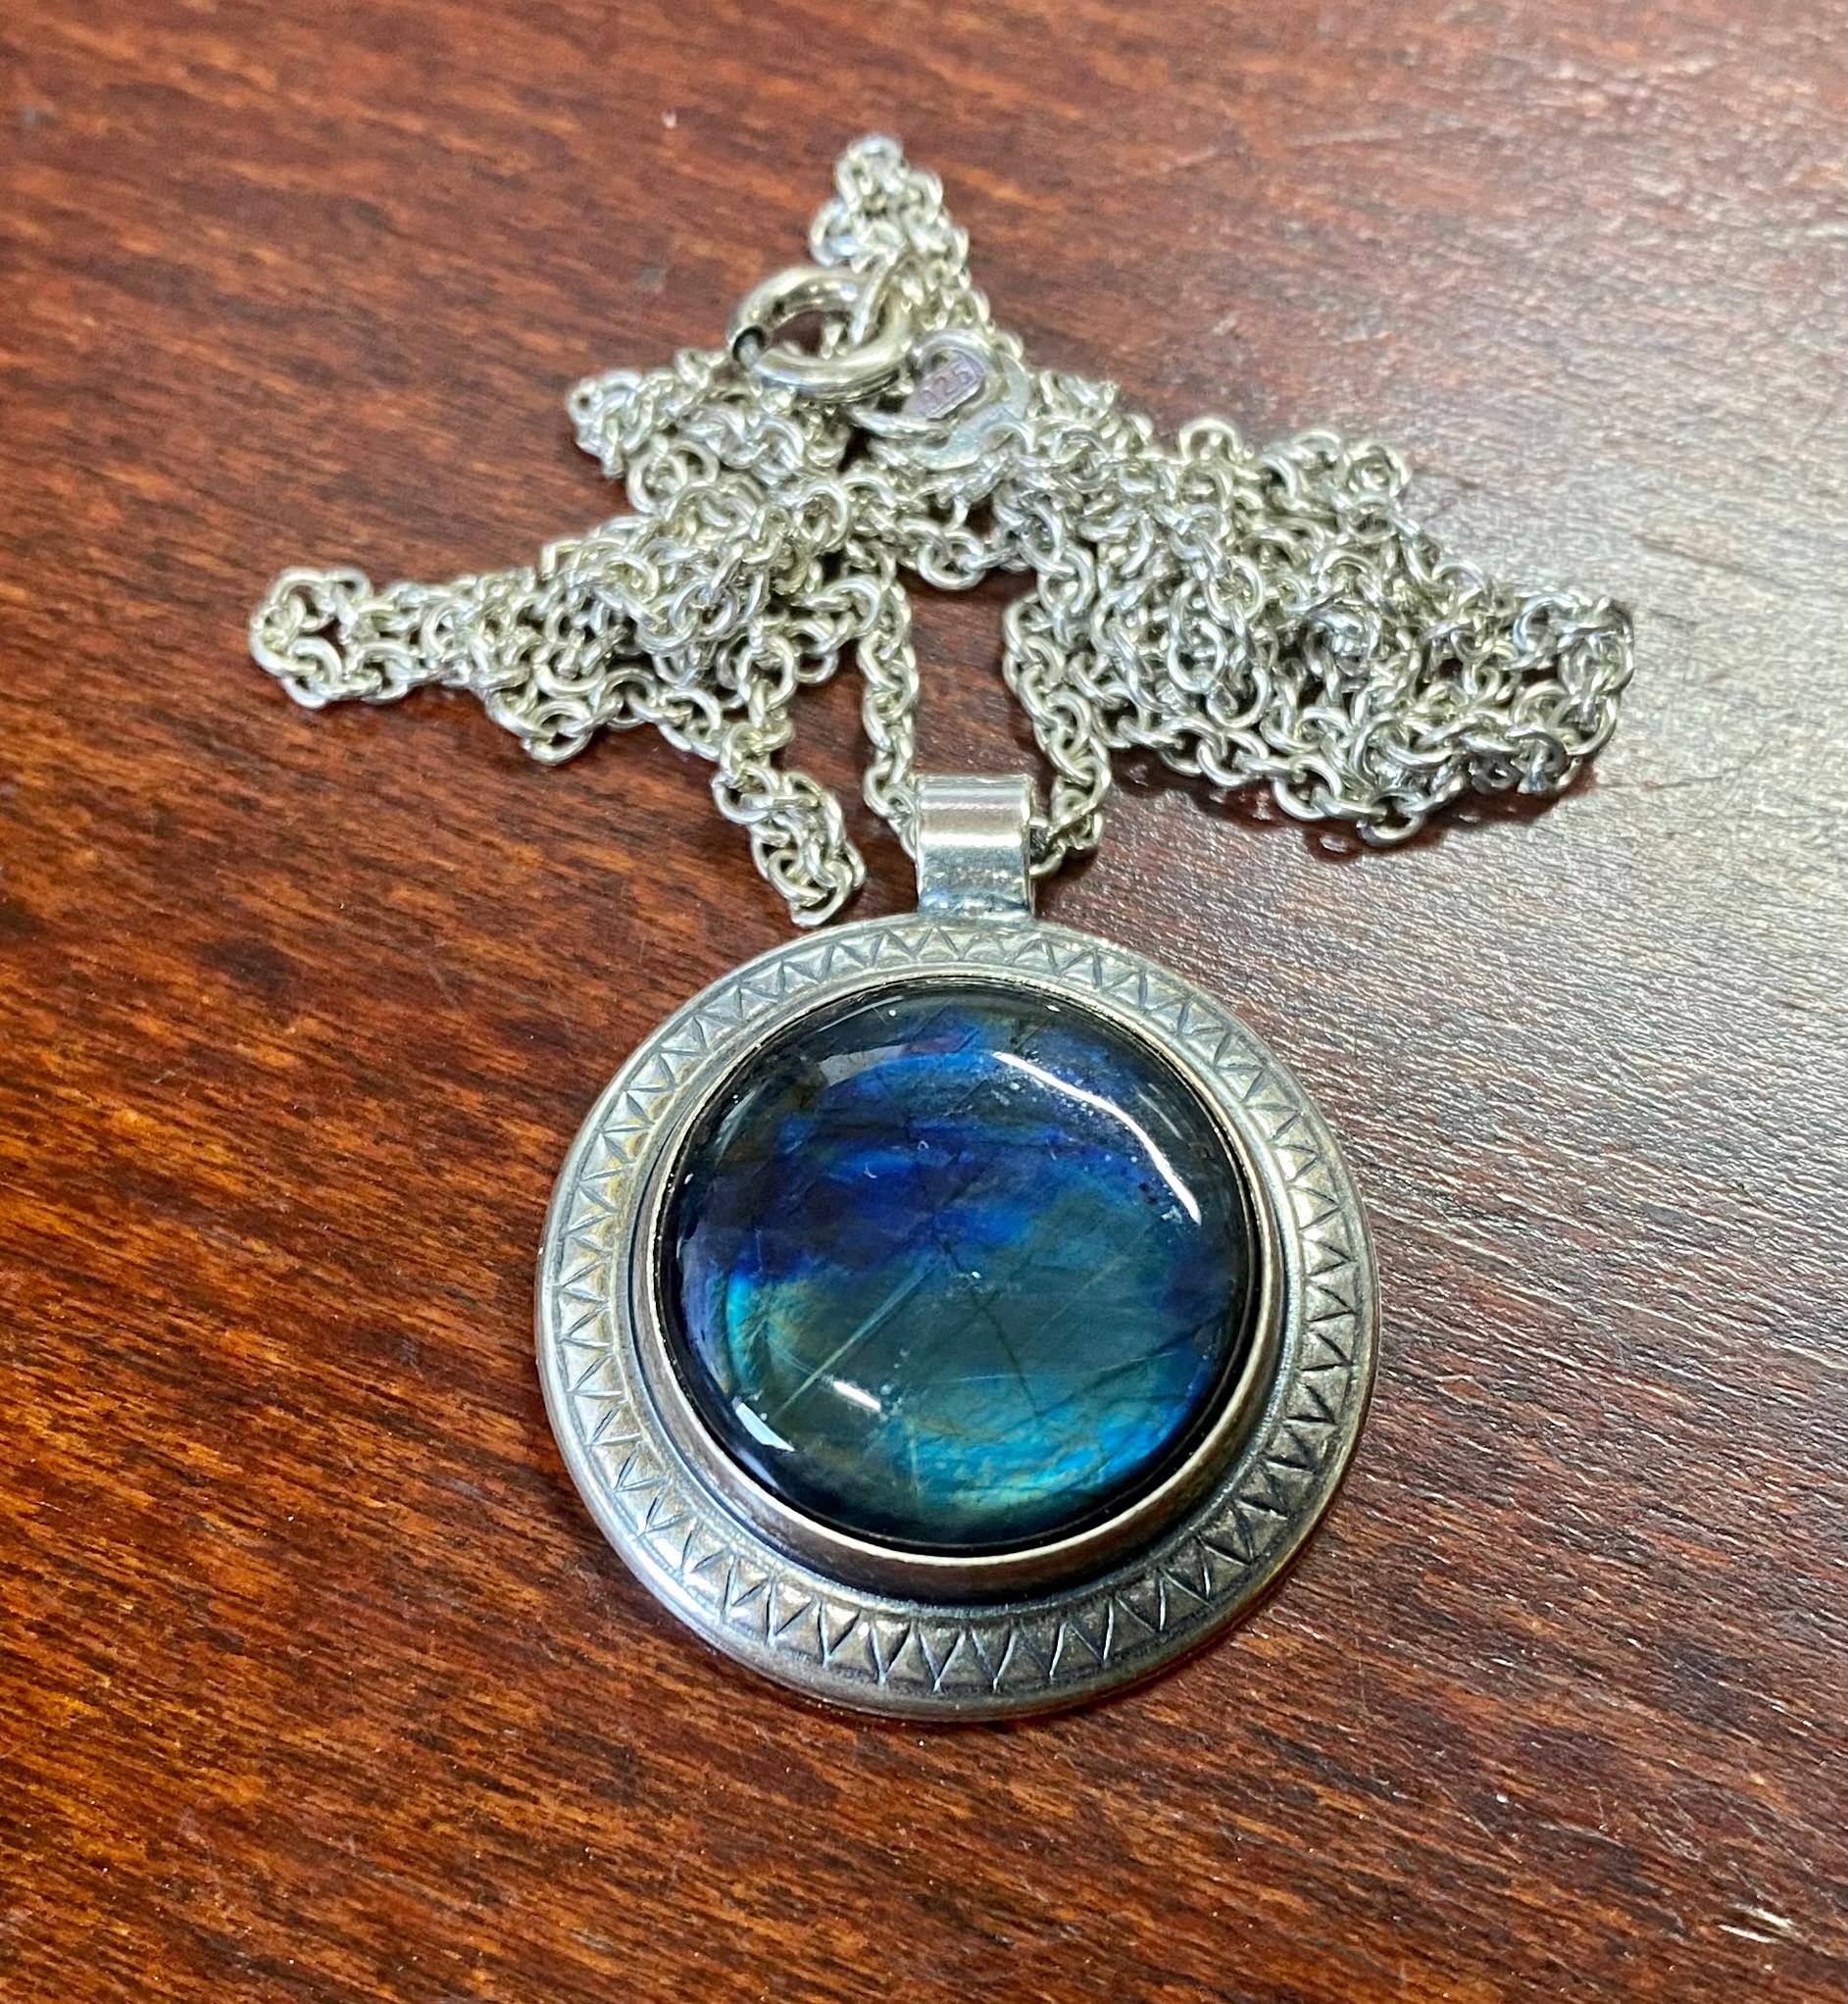 Silver 925H Spectrolite Necklace Finland Kalevala Jewelry.

A really nice Stone.
The blue-green Spectrolite shimmers beautifully in the light.
I also have earrings from the same series for sale. See the wine picture.
Nice piece of jewelry.